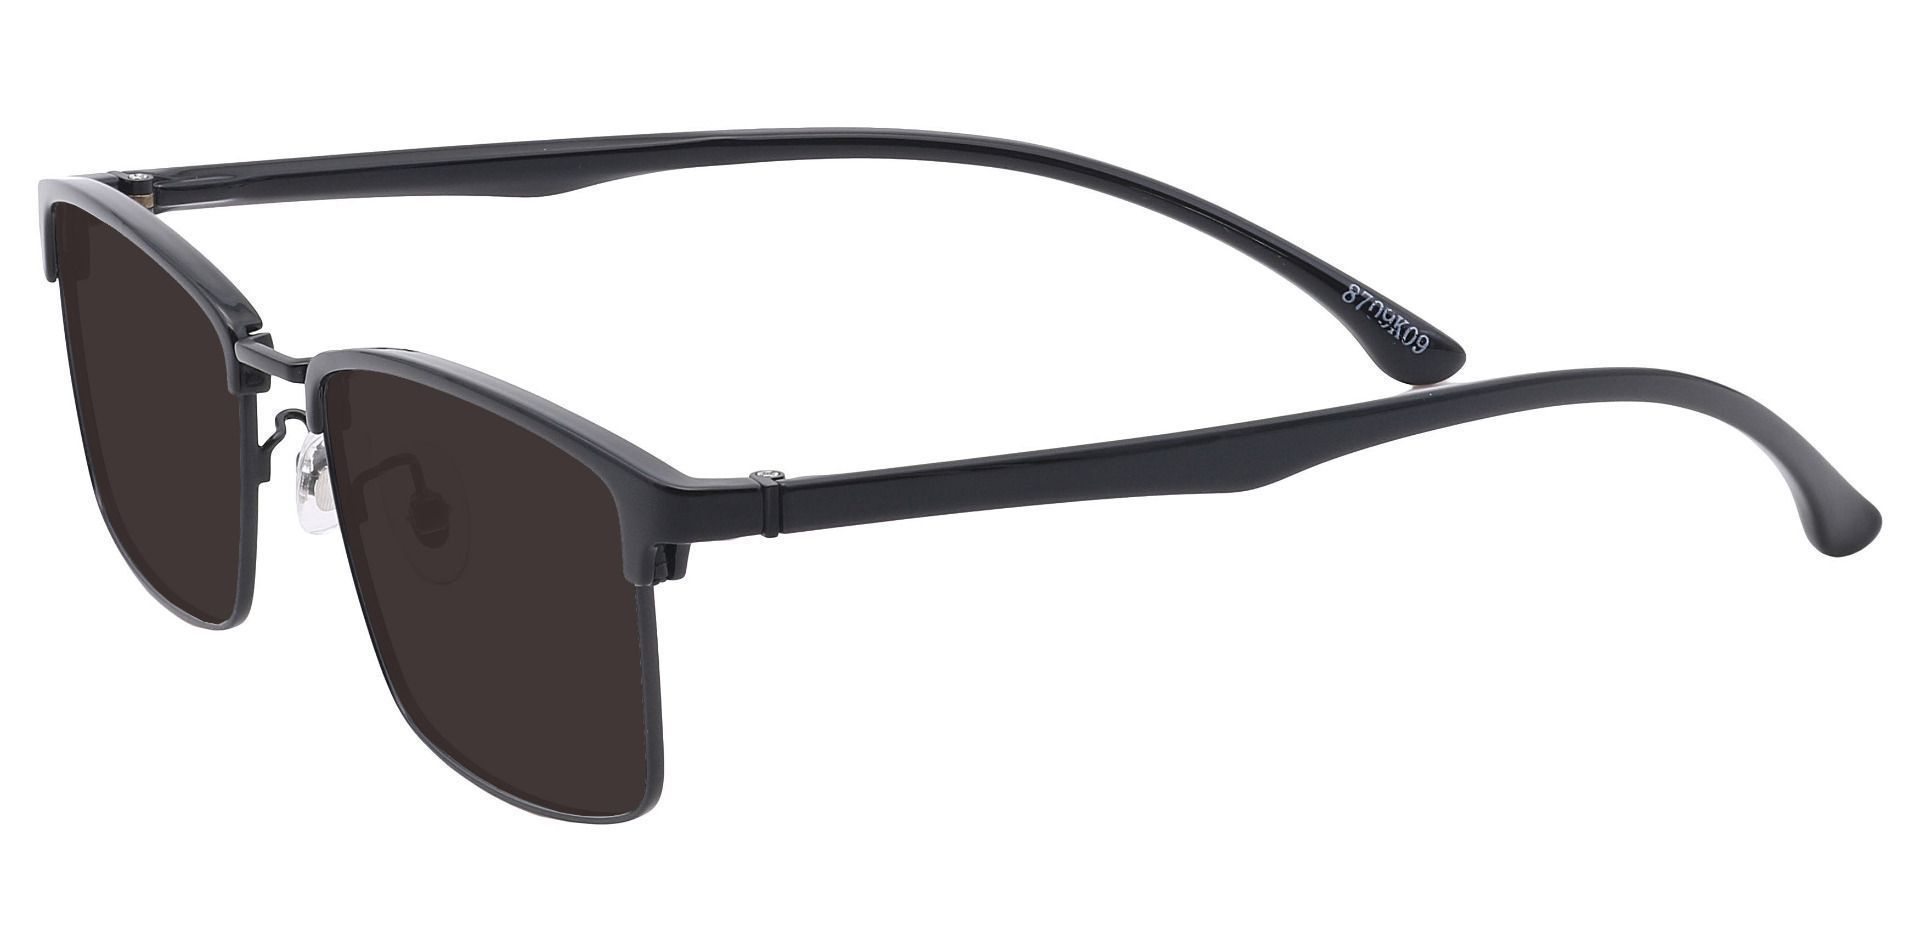 Young Browline Progressive Sunglasses - Black Frame With Gray Lenses